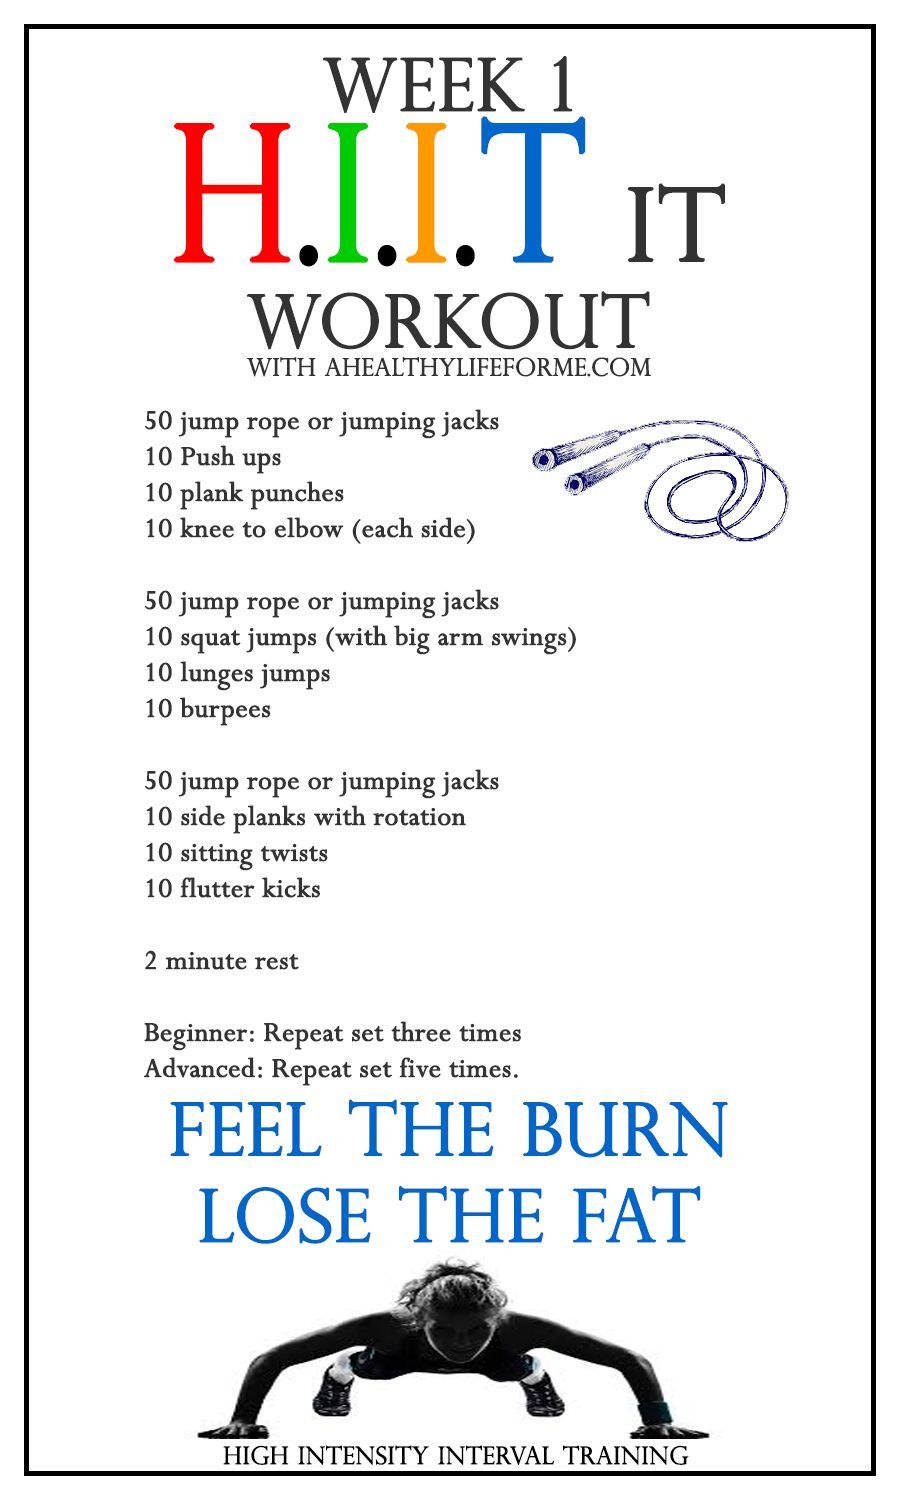 HIIT Workout Week 1 – A Healthy Lif